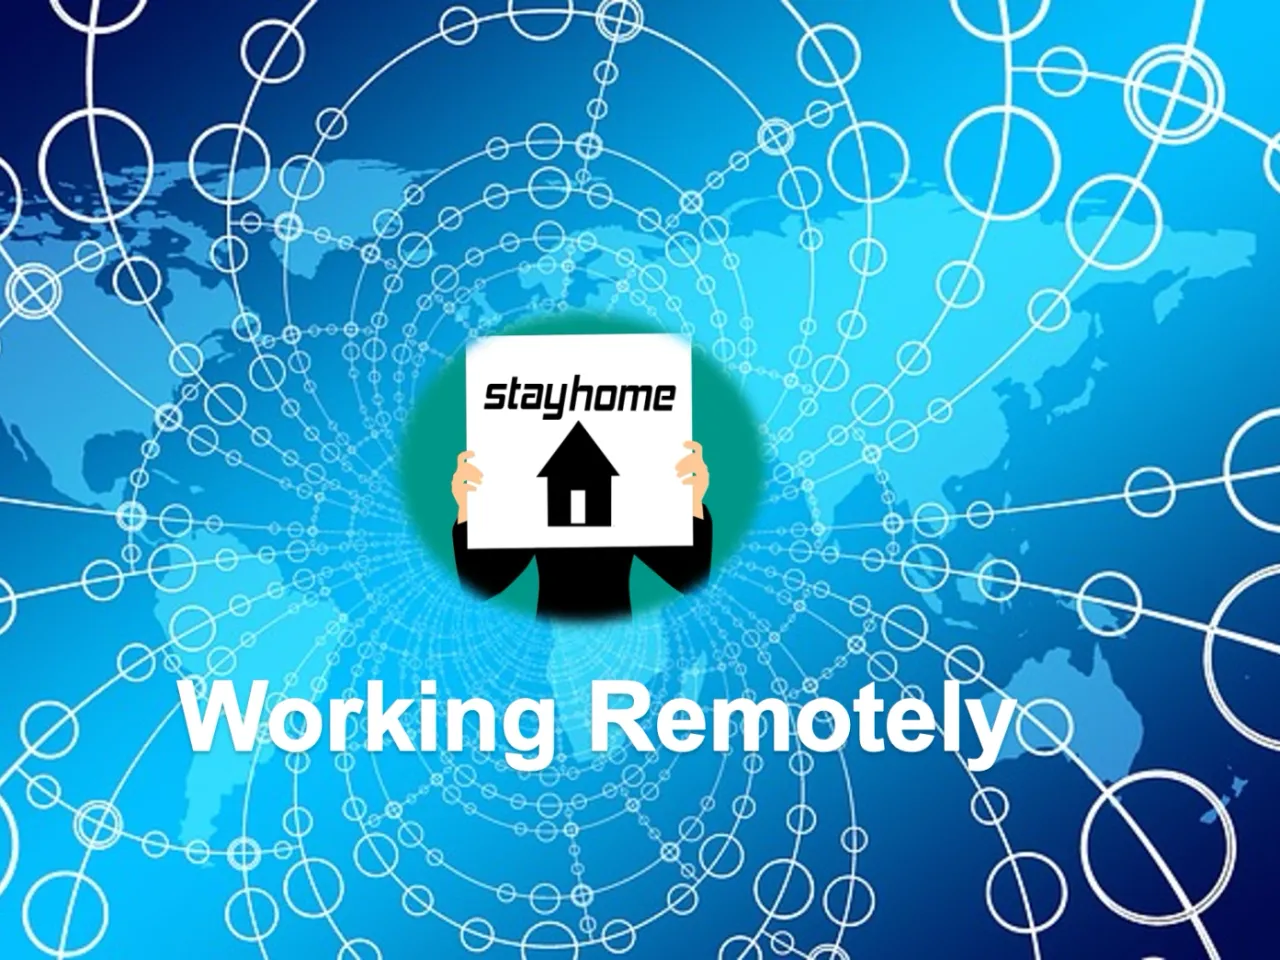 A poster on work remotely and stay home